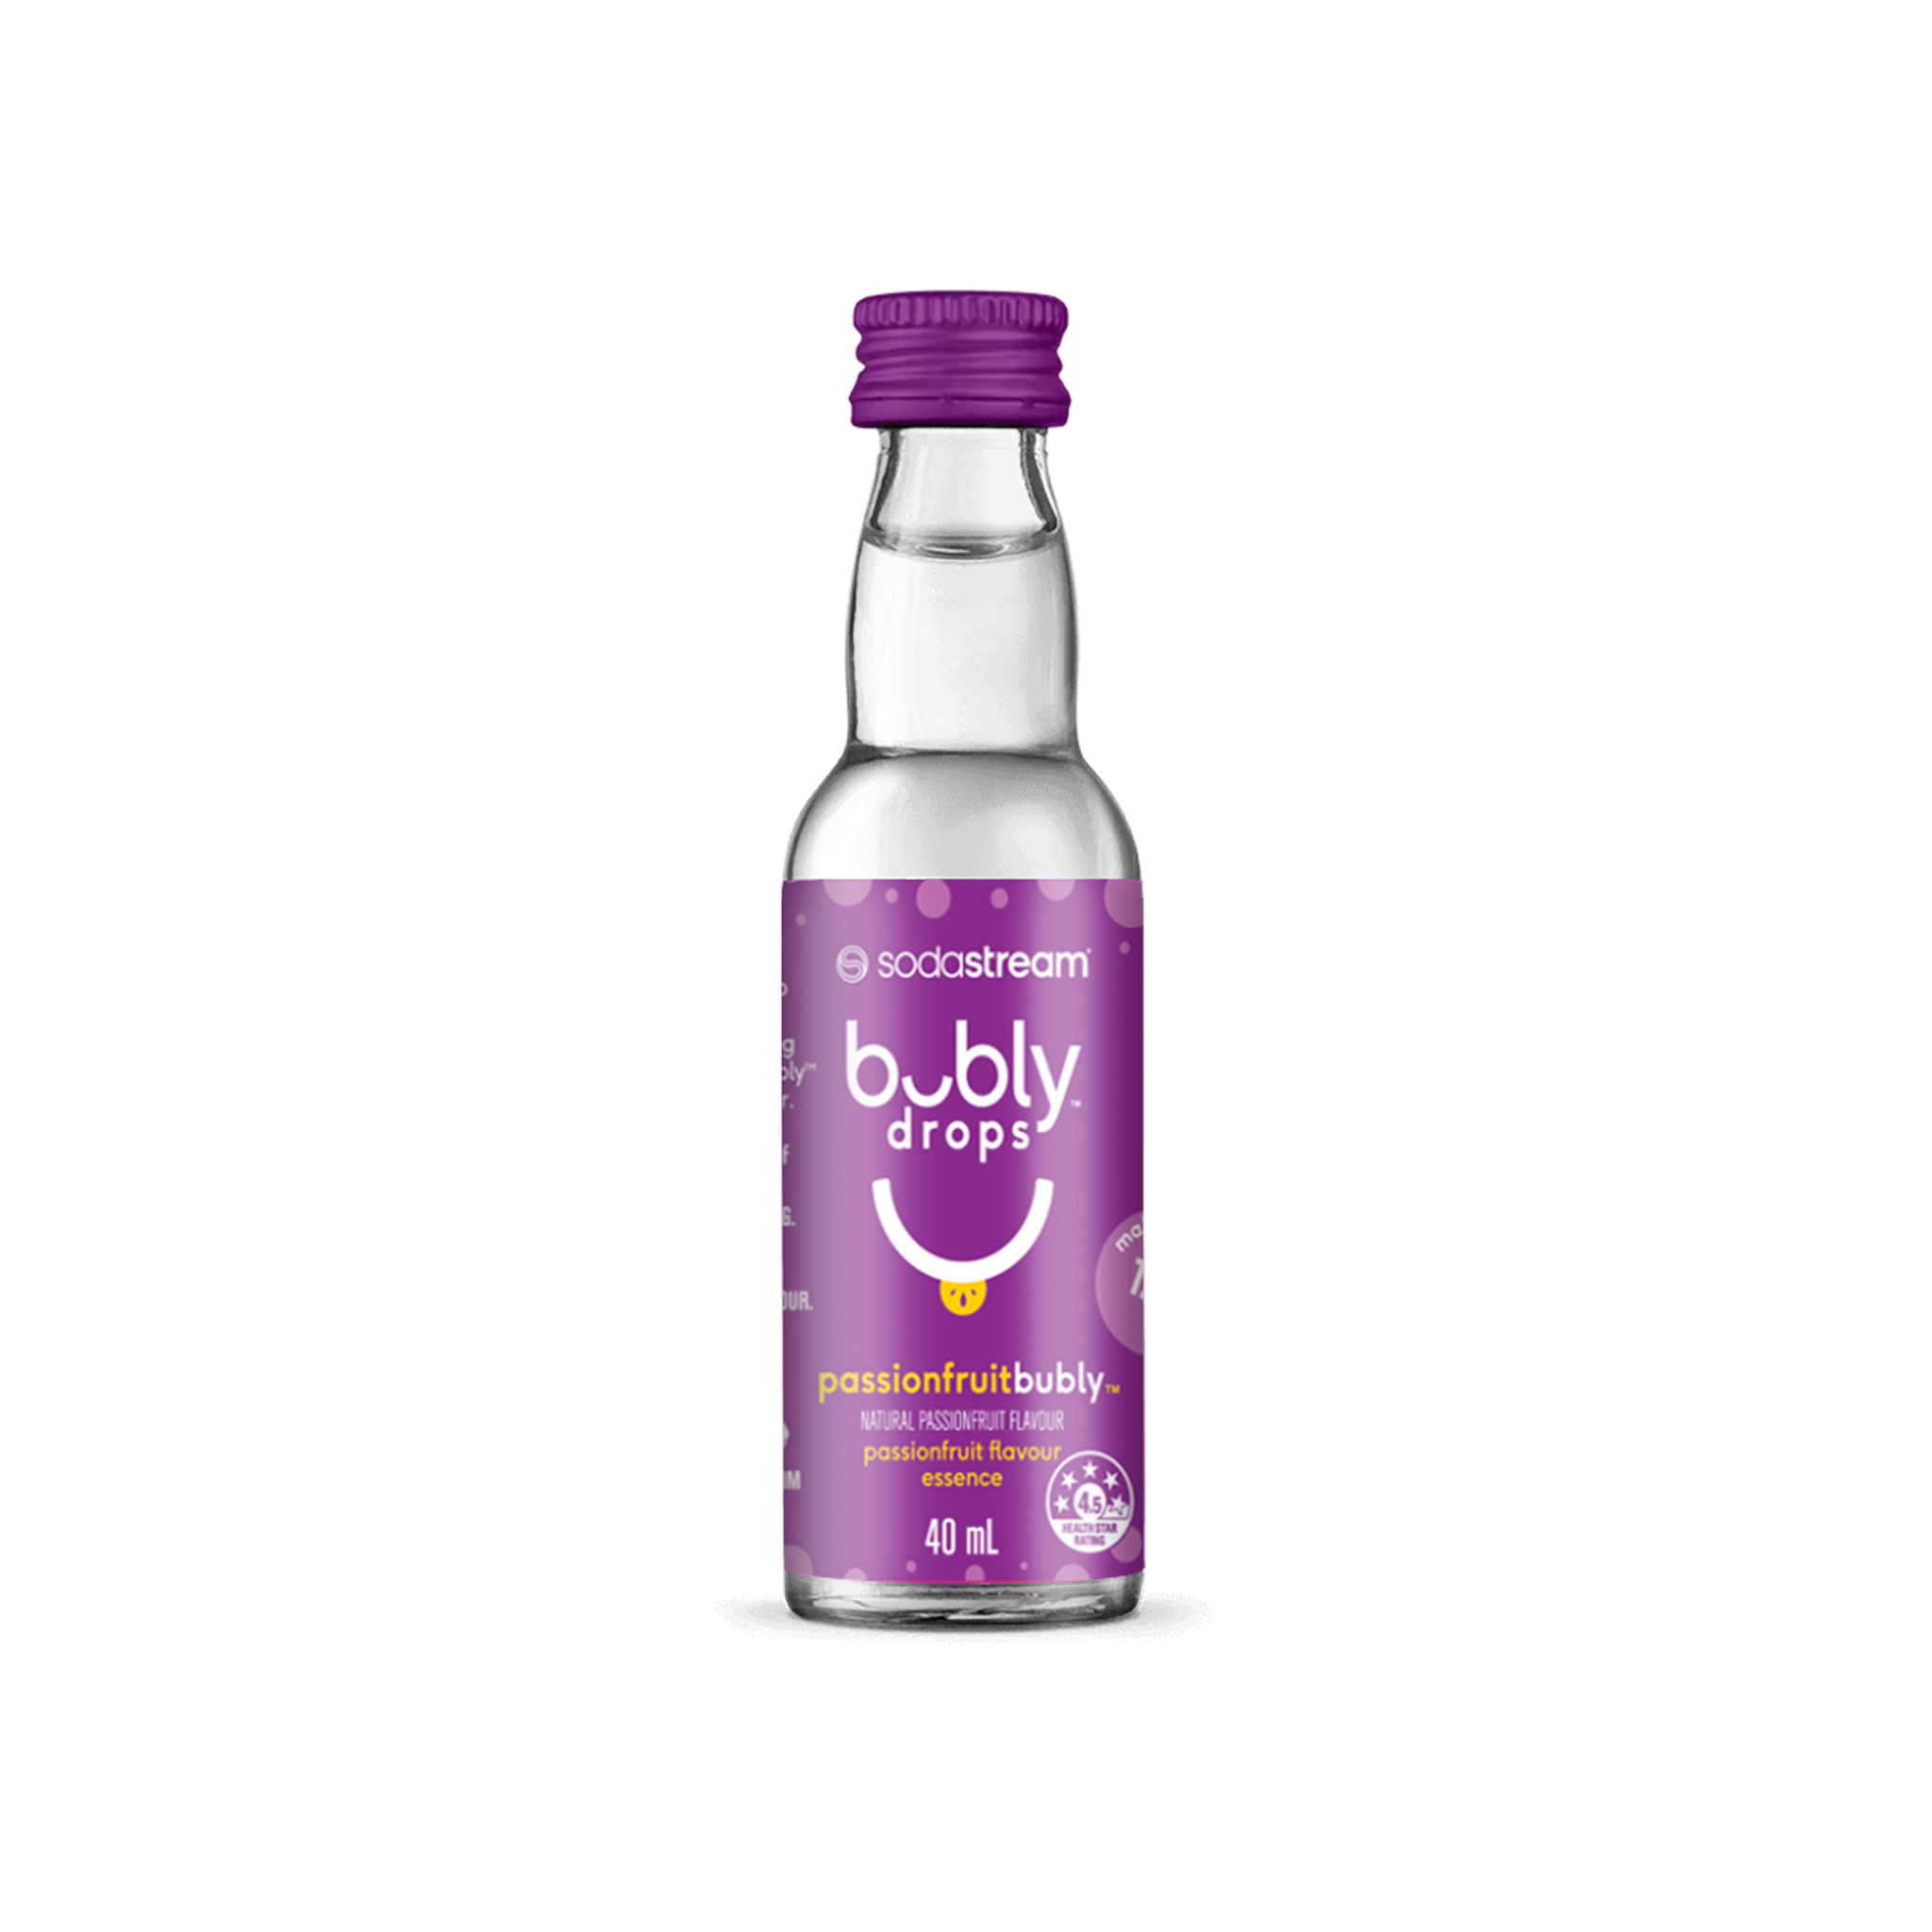 passionfruit bubly drops™